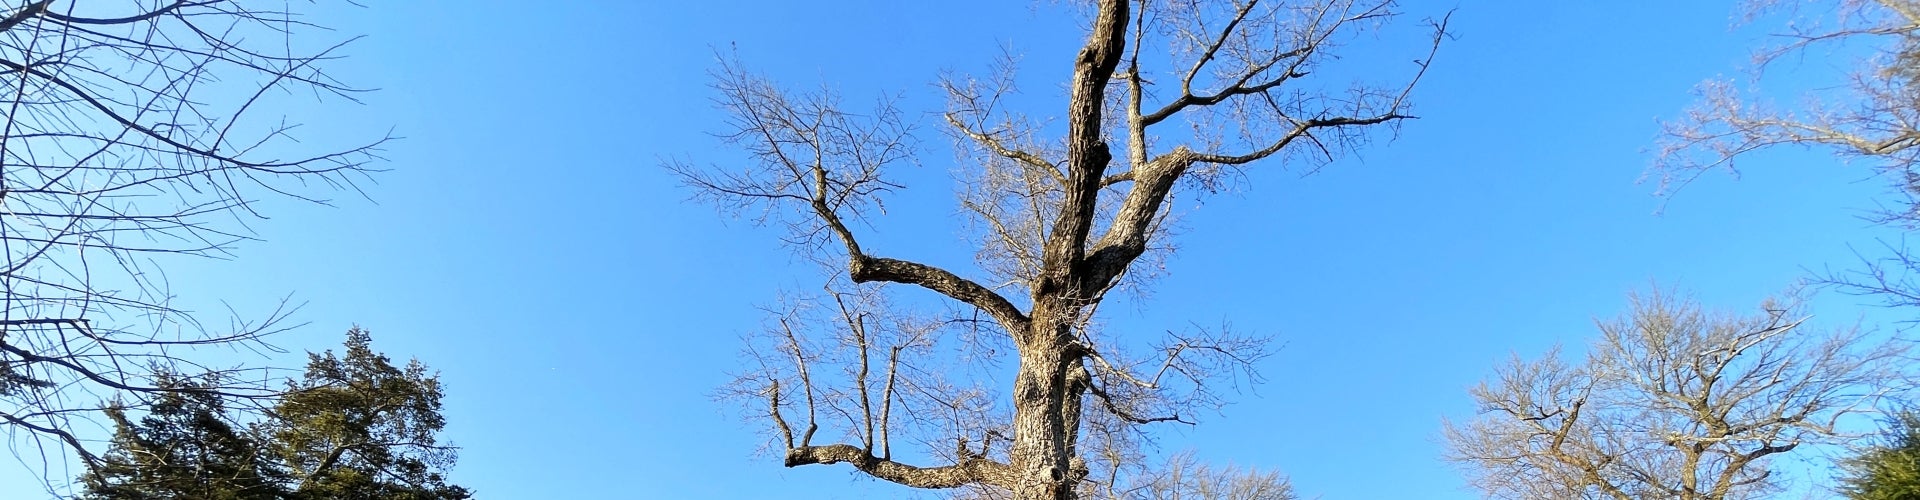 A tall tree with bare limbs sits on a grassy slope.